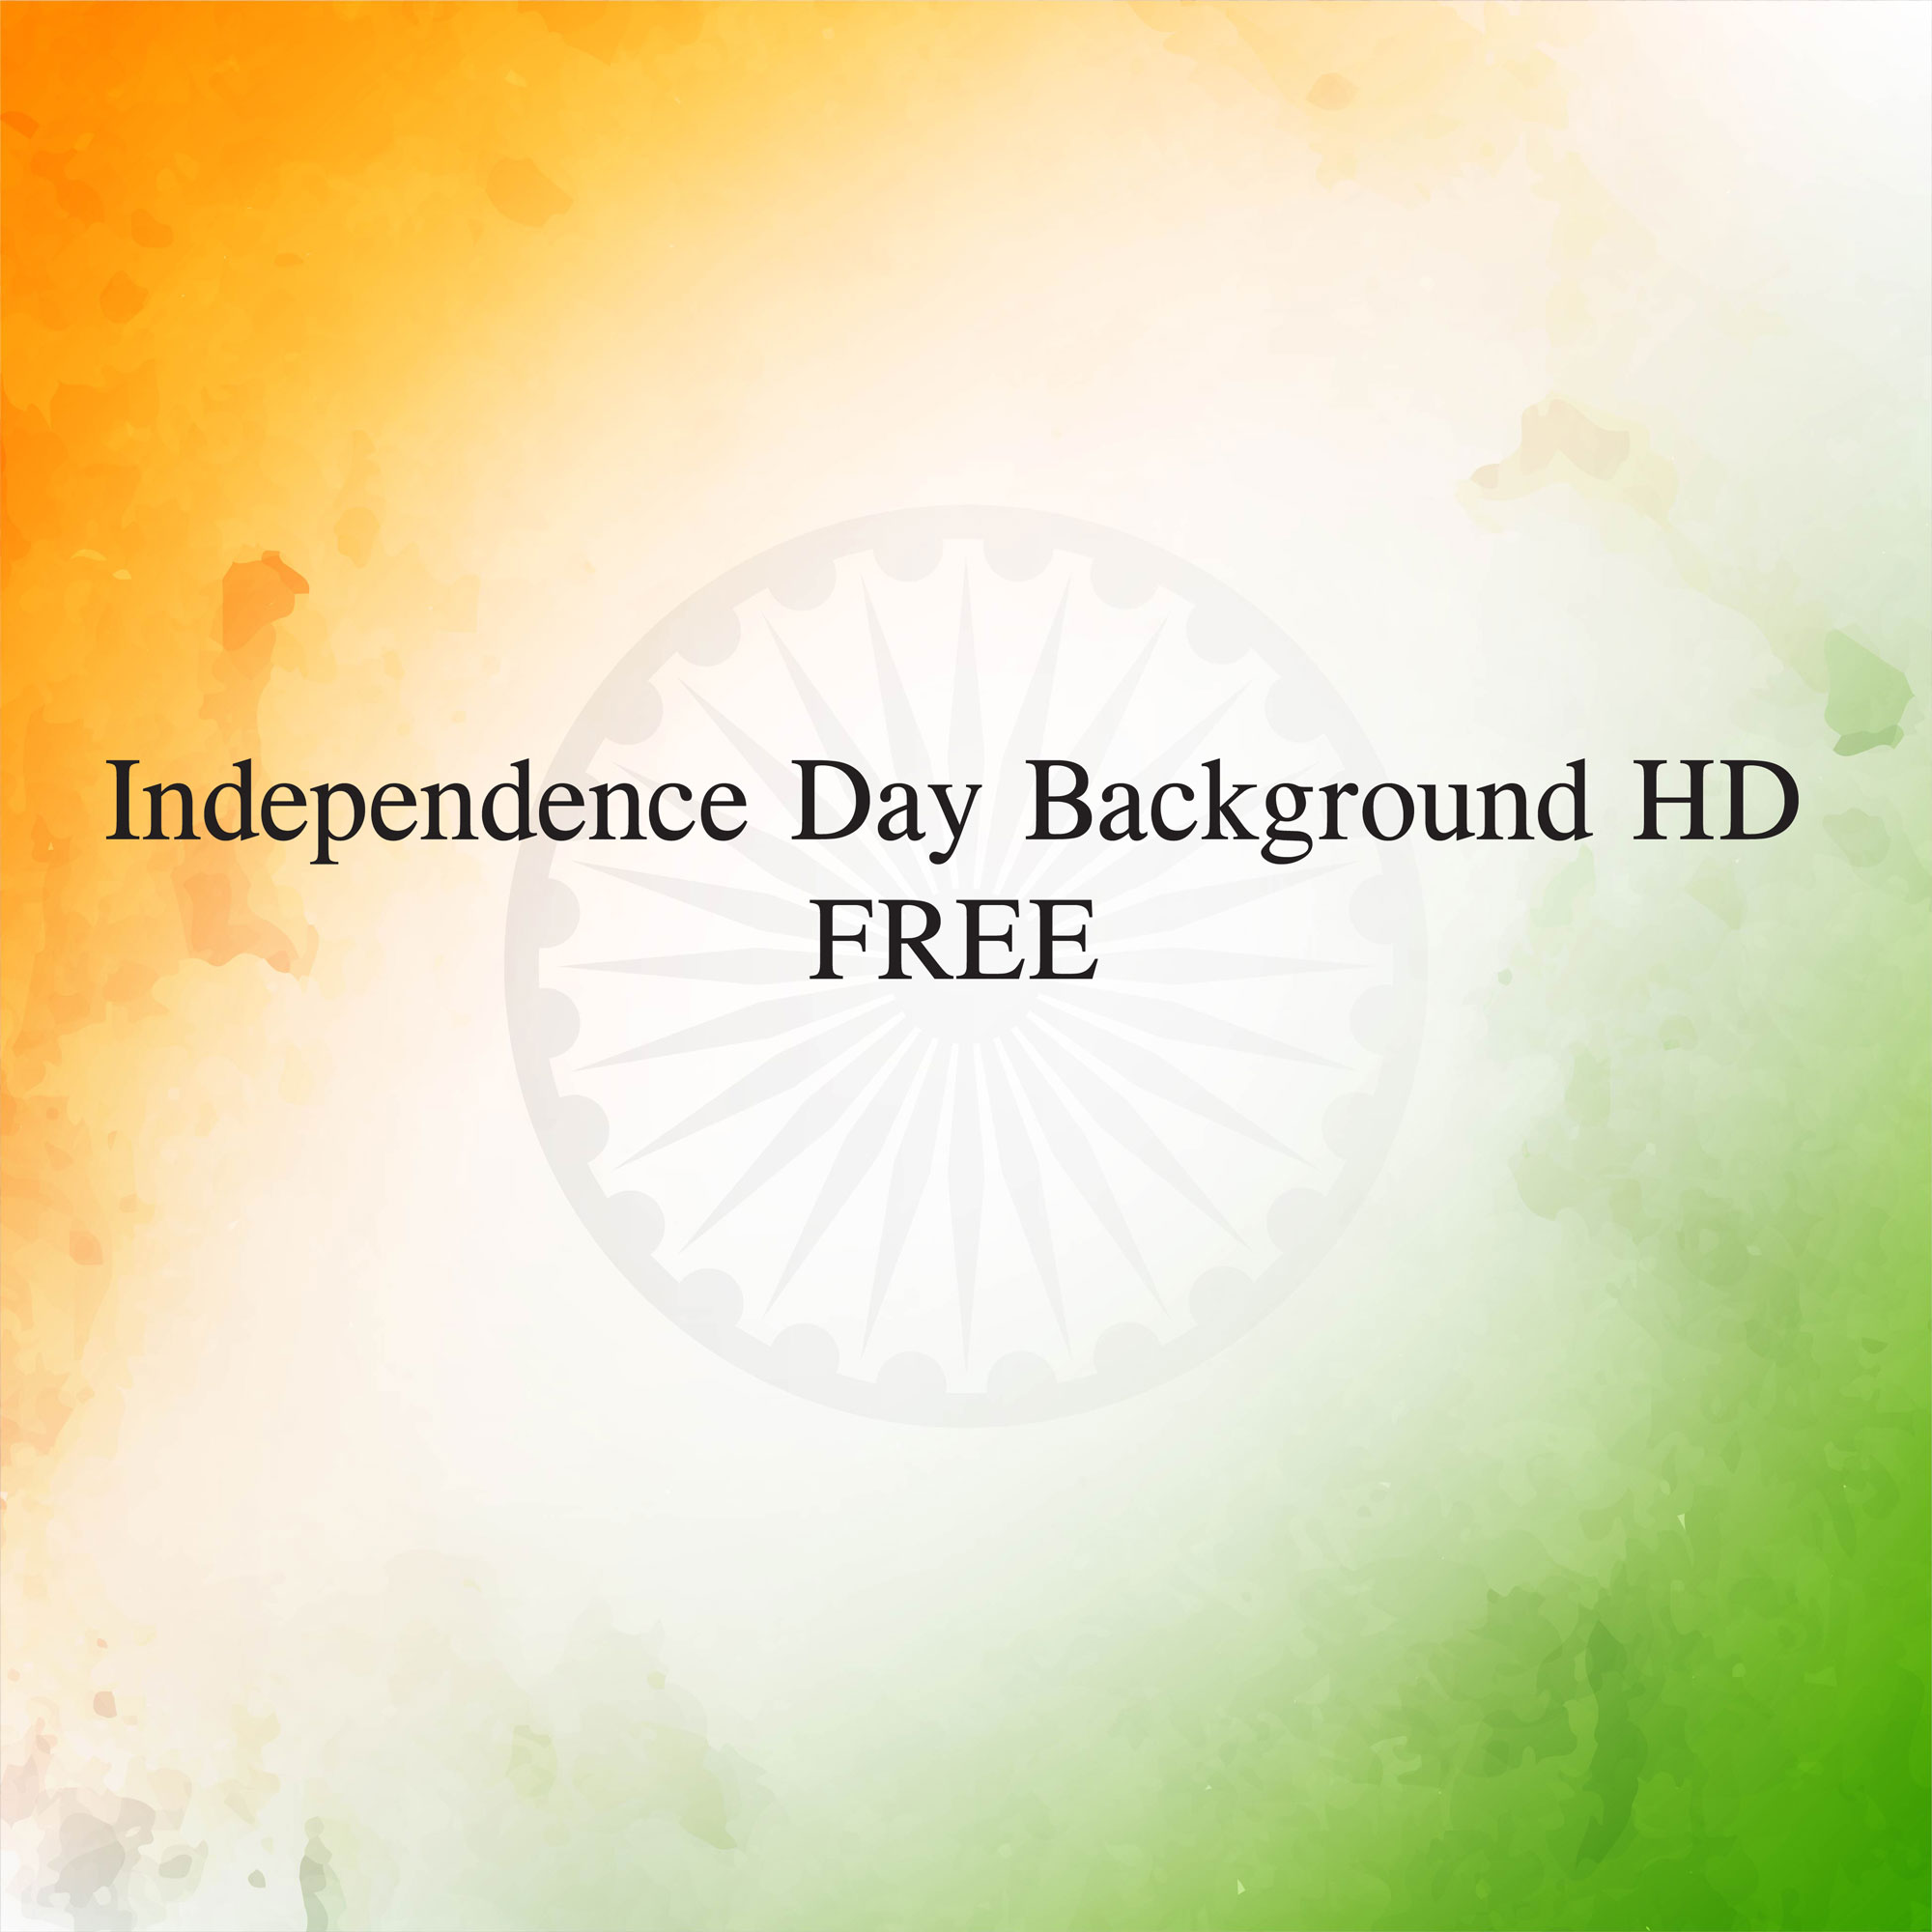 Independence Day Background HD - FREE Vector Design - Cdr, Ai, EPS, PNG, SVG